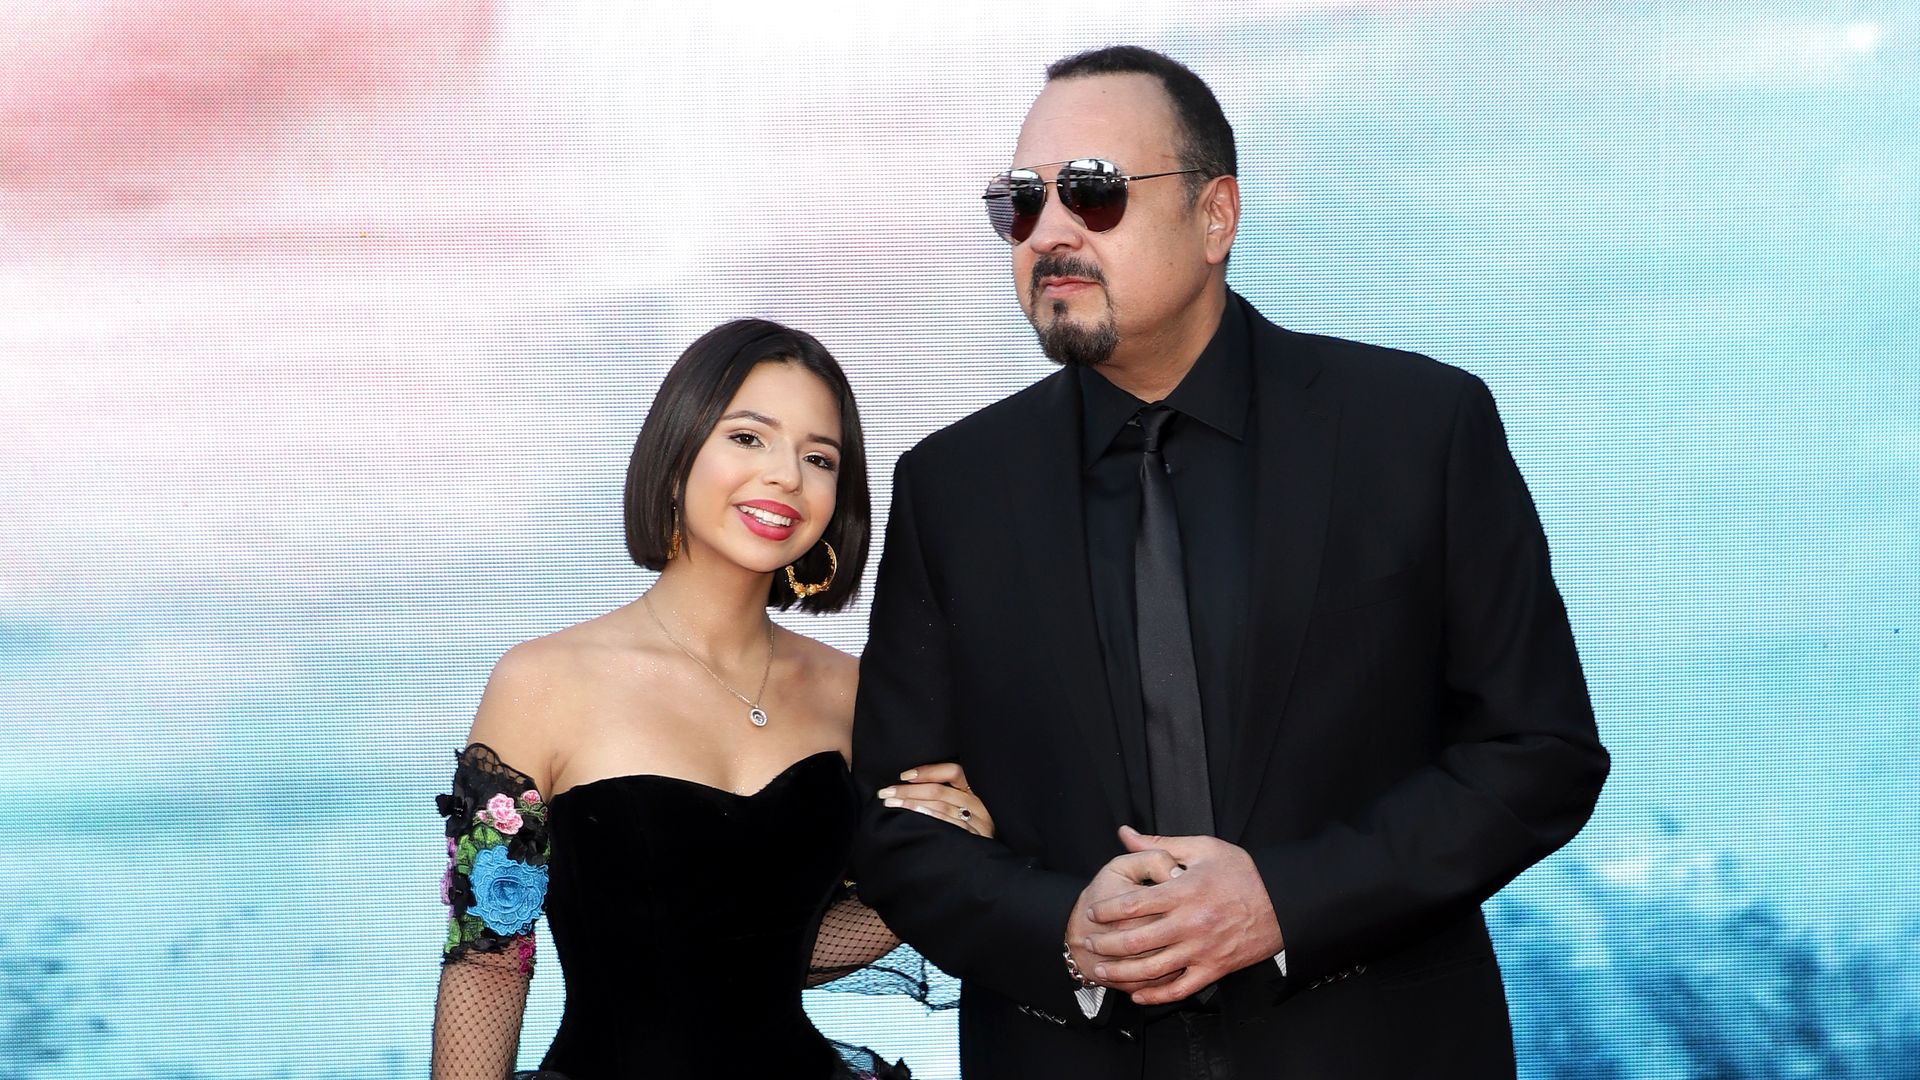 Ángela Aguilar reunites with Pepe Aguilar after confirming her romance with Christian Nodal